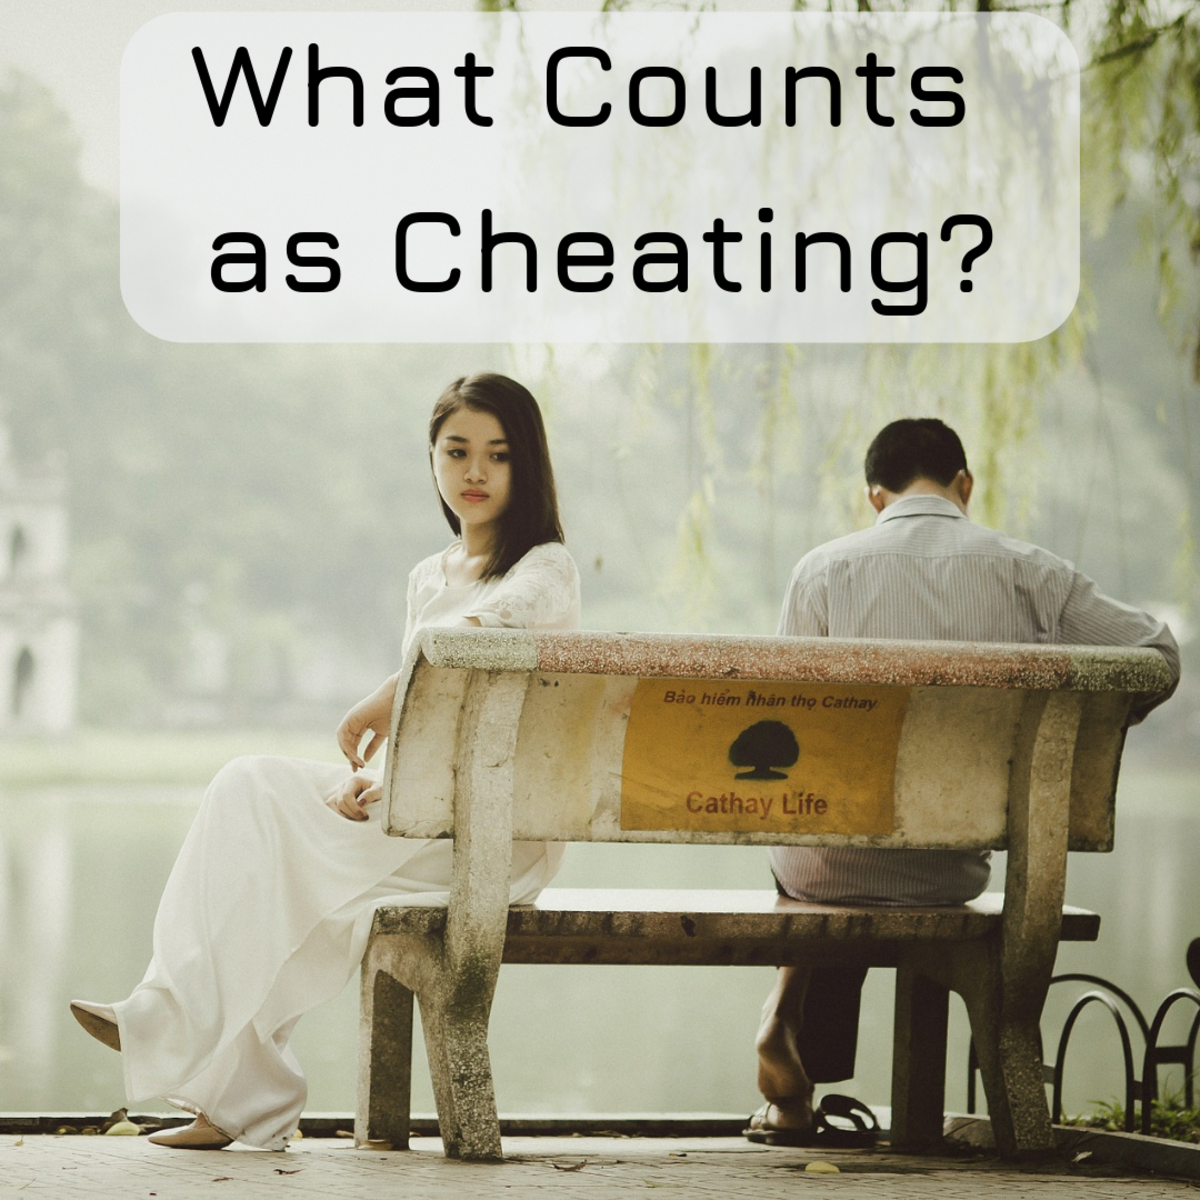 How to Catch Them Cheating: When Do Privacy Rights Become Involved?